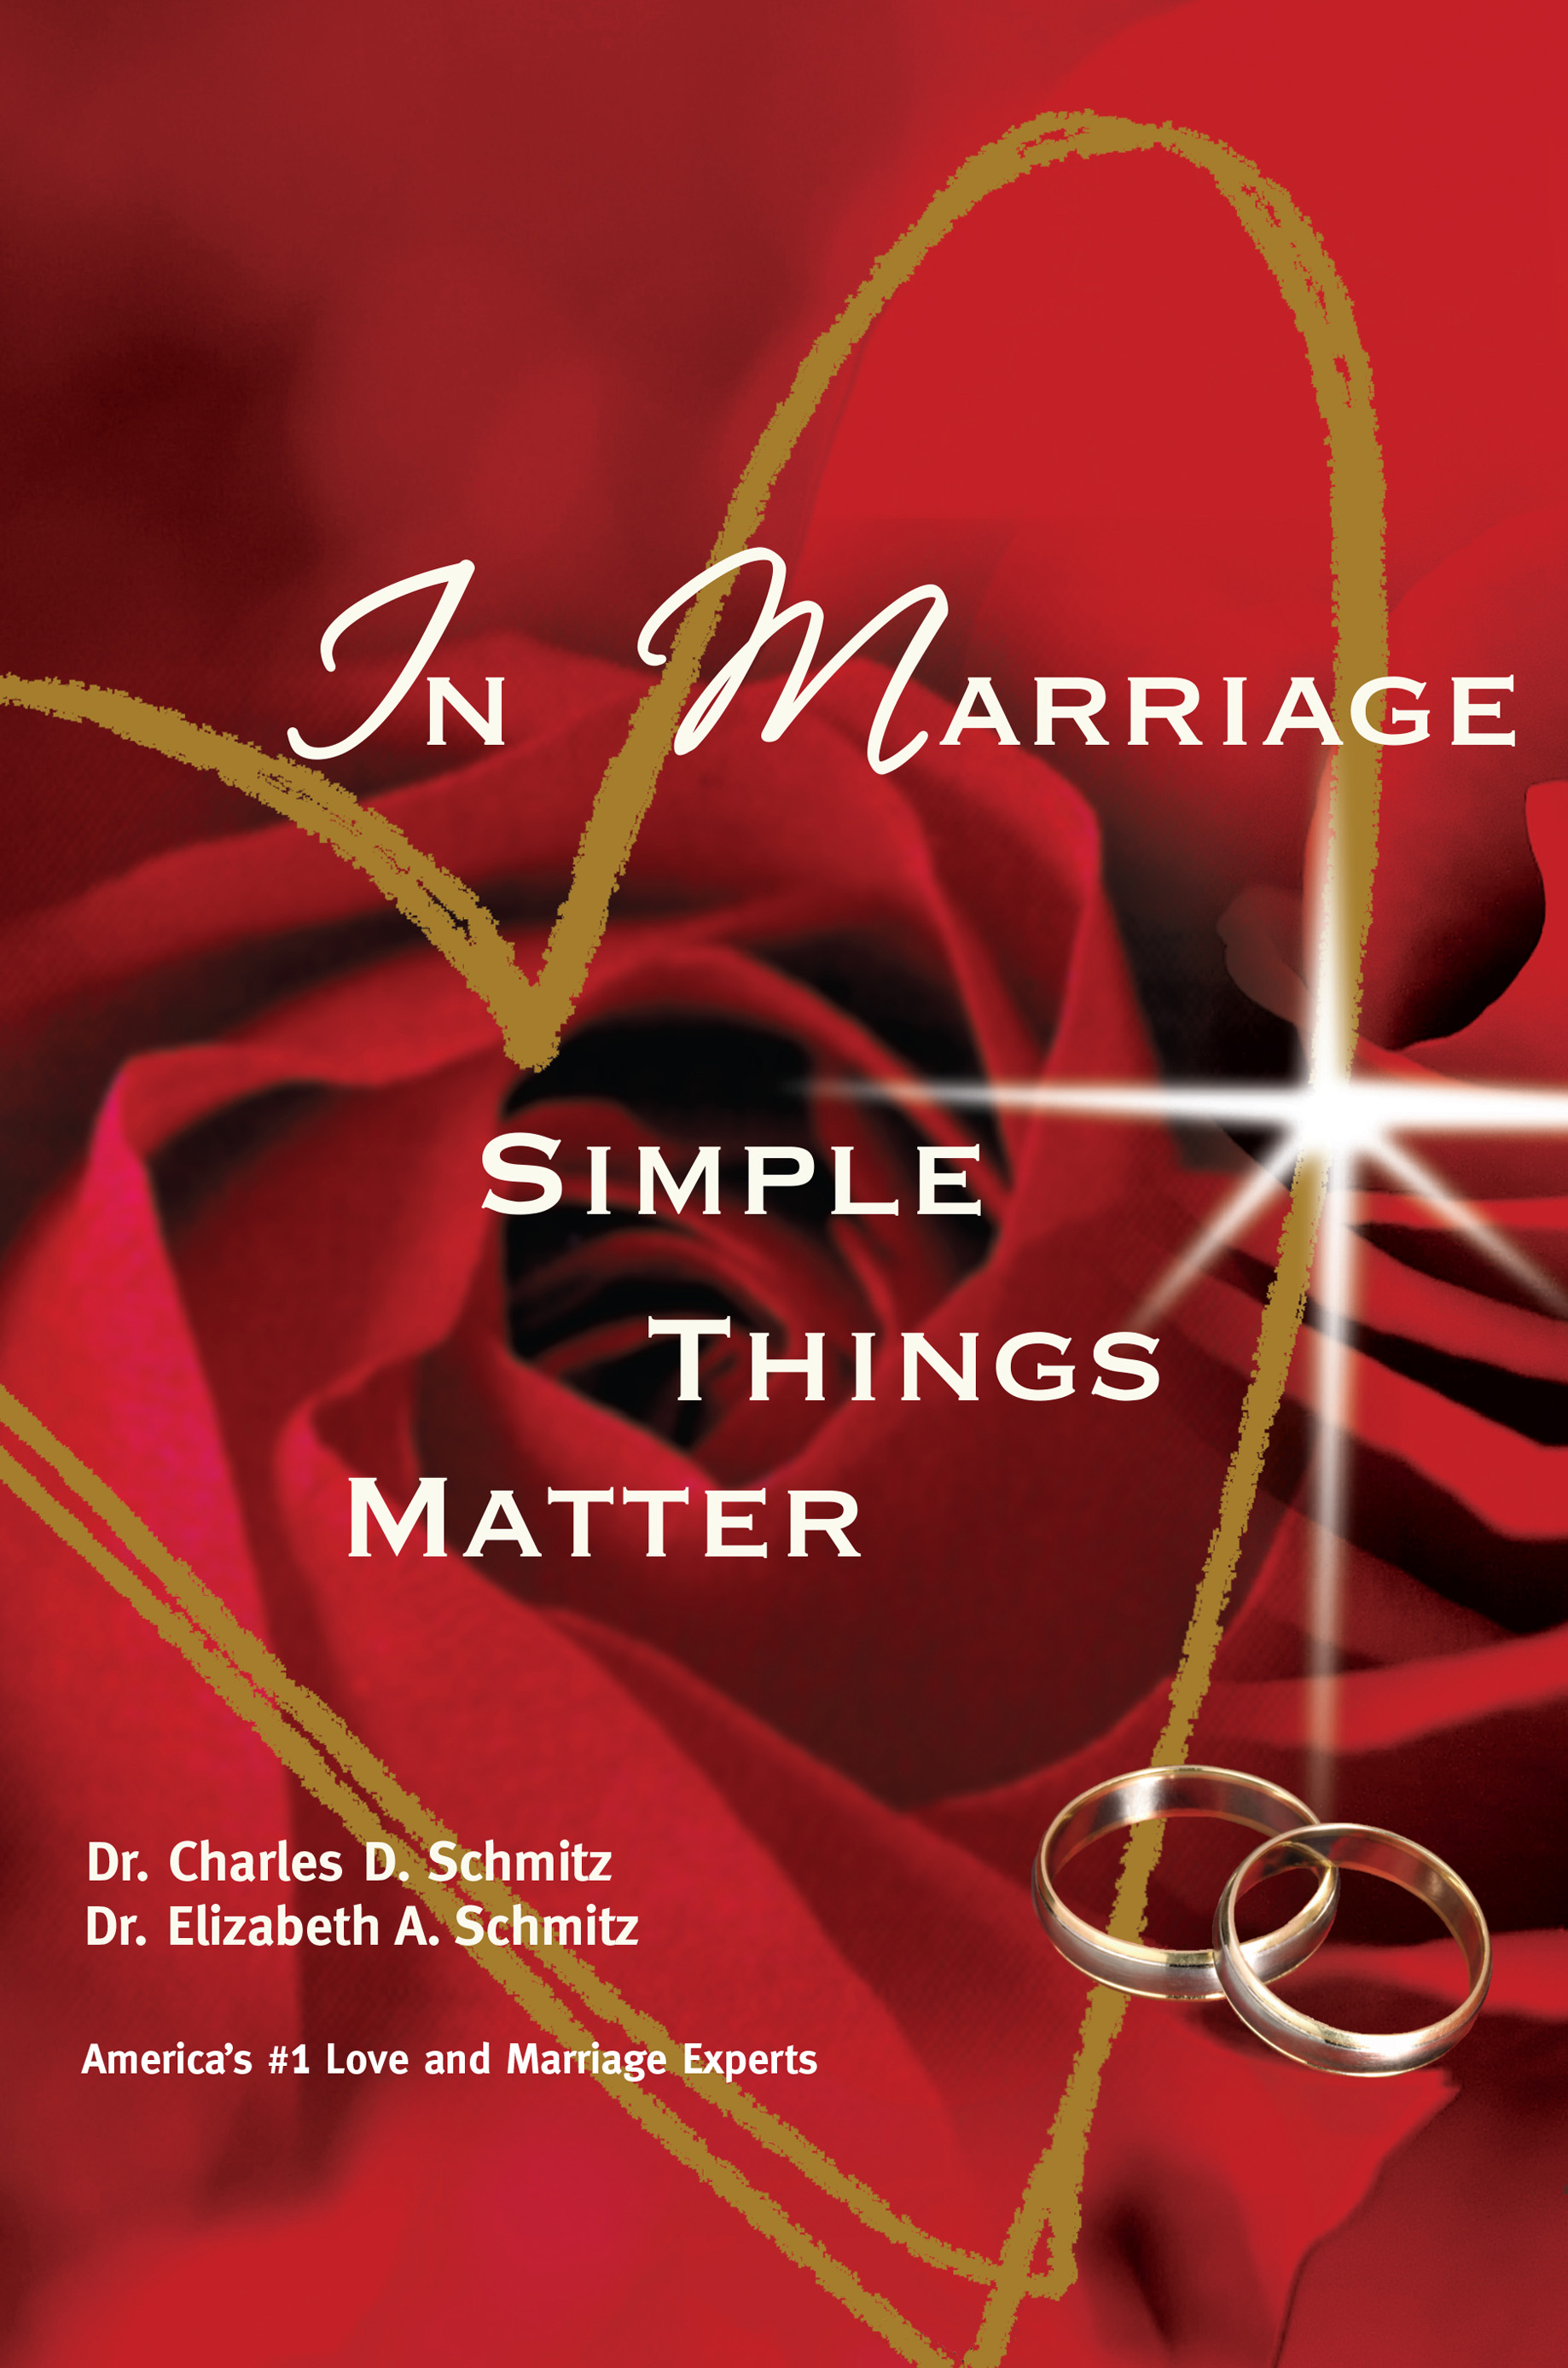 In Marriage Simple Things Matter by America's #1 Love and Marriage Experts, Dr. Charles D. Schmitz and Dr. Elizabeth A. Schmitz